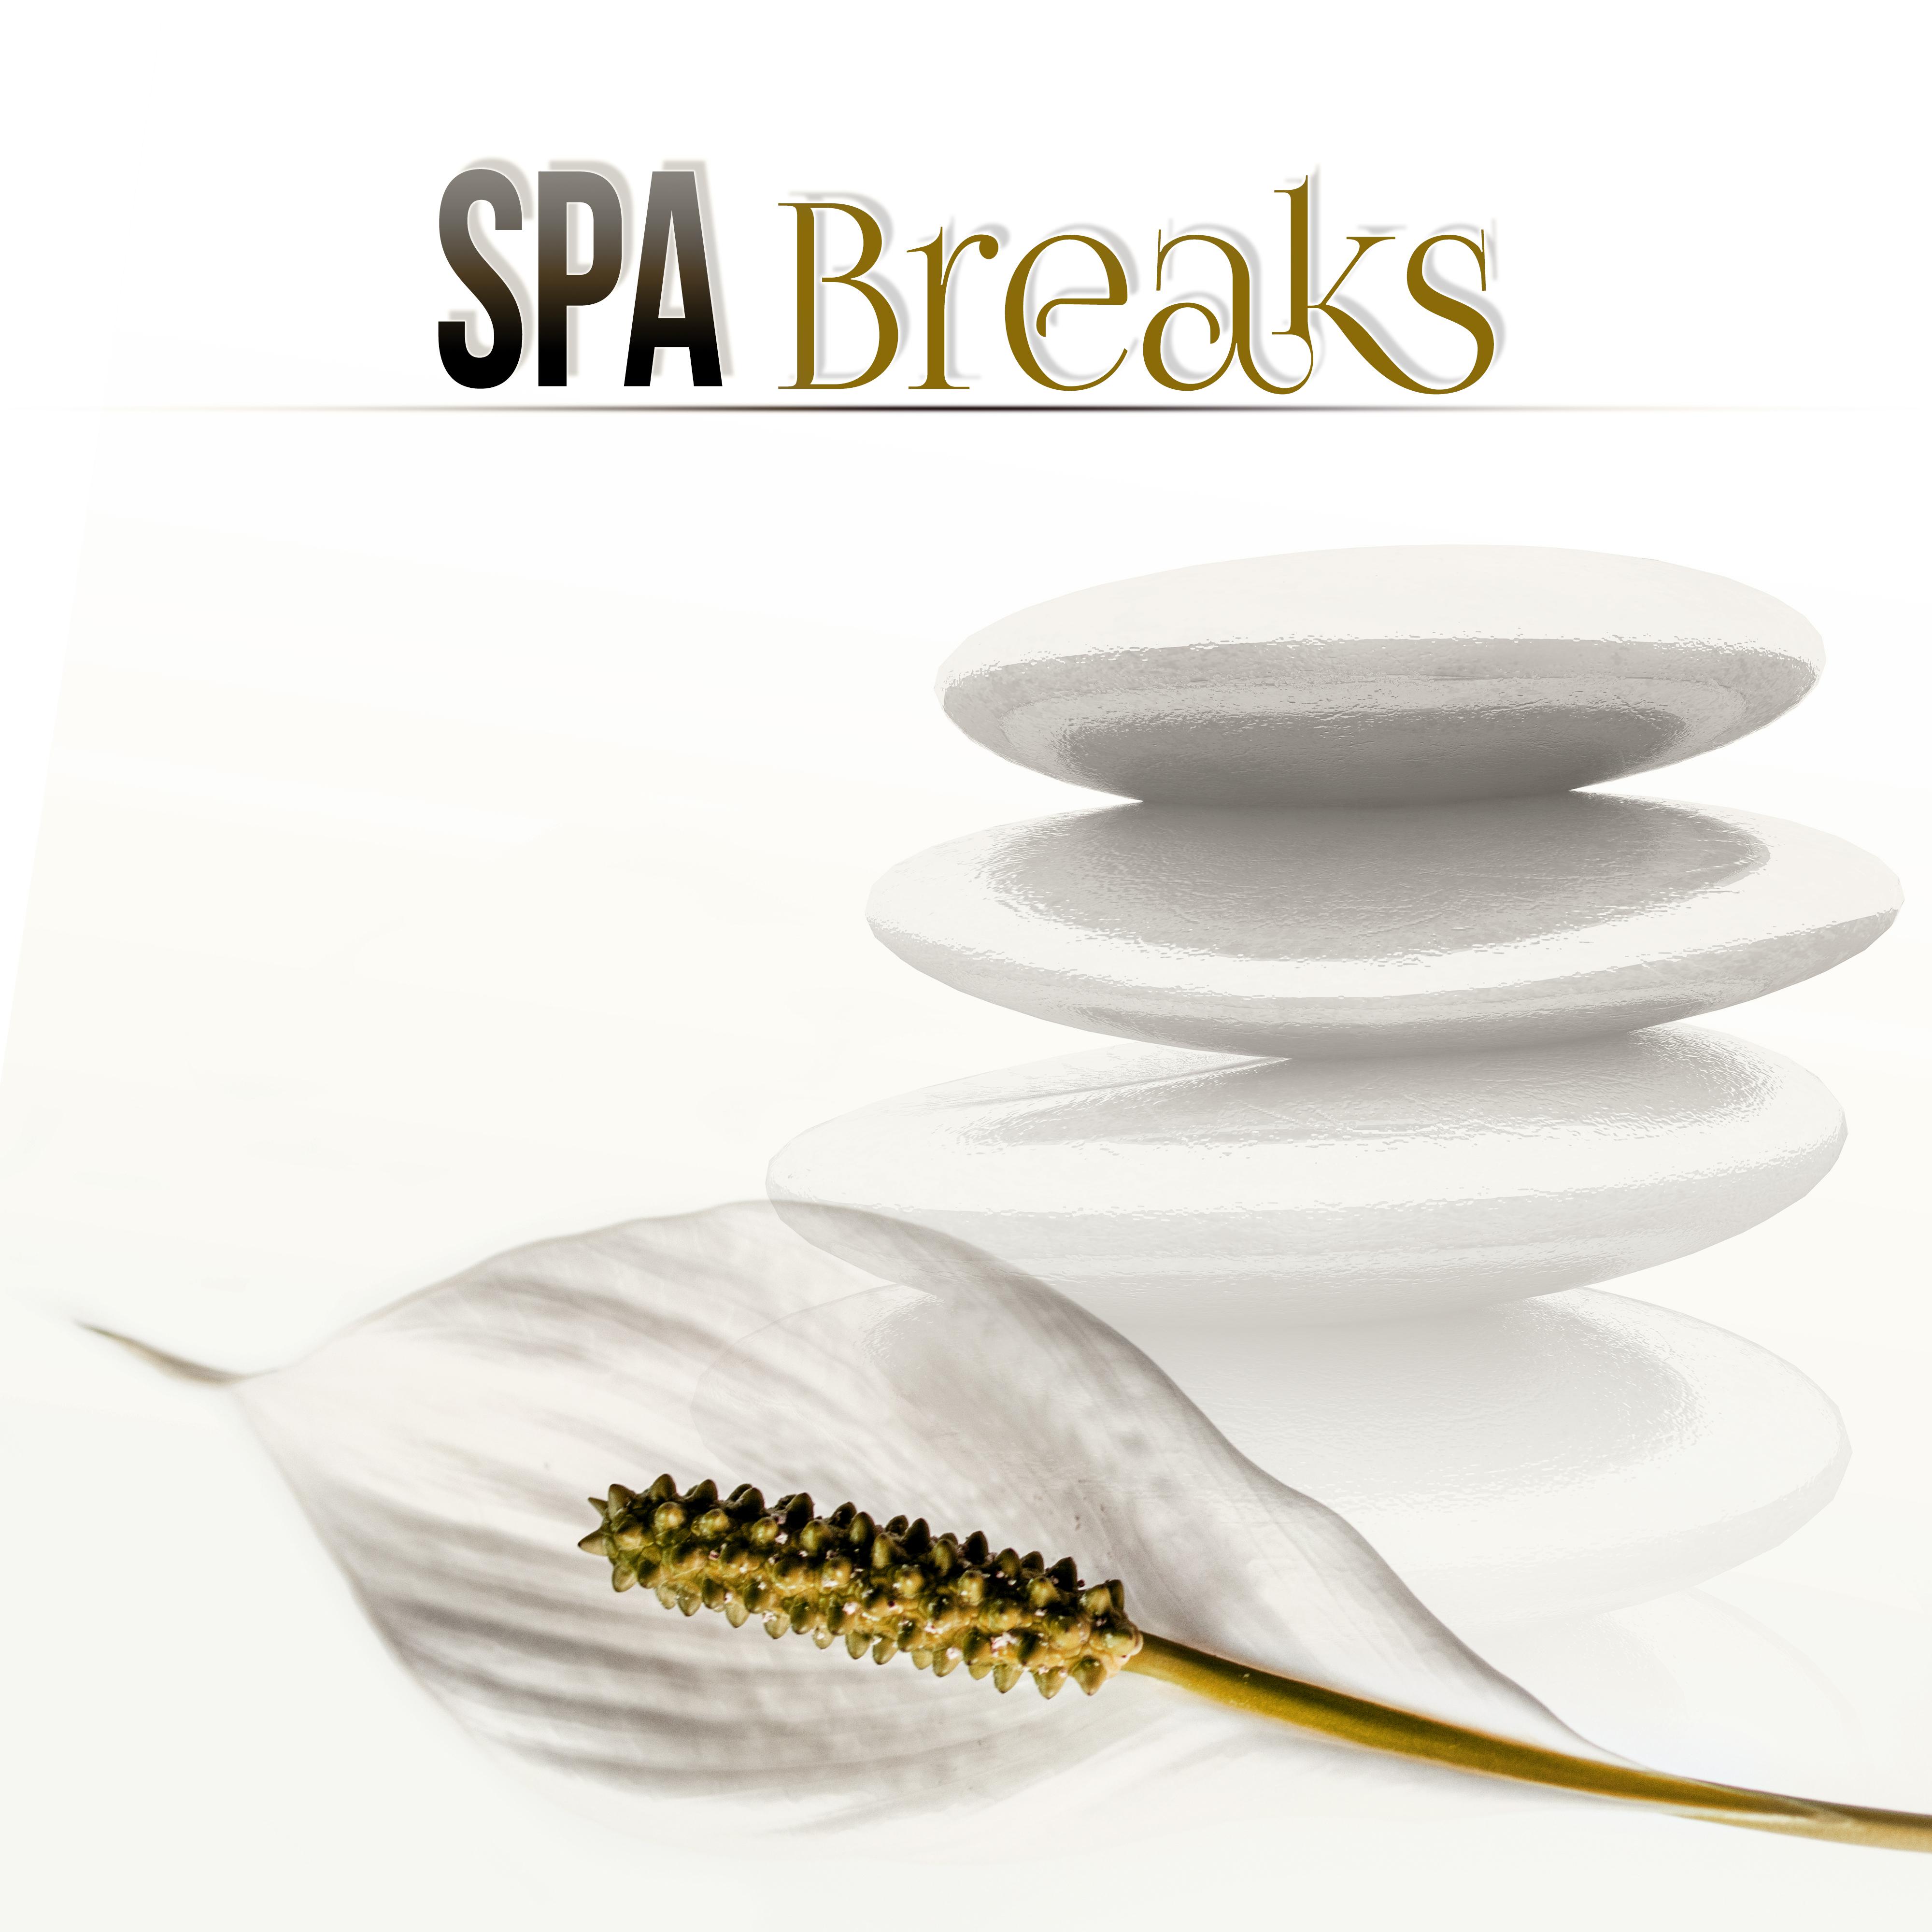 Spa Breaks – New Age Music for Beauty Salon and Spa, Relaxation, Massage, Acupressure, Aromatherapy, Beautiful and Healthy Body, Healing Power, Well Being, Rest After Work with Nature Sounds